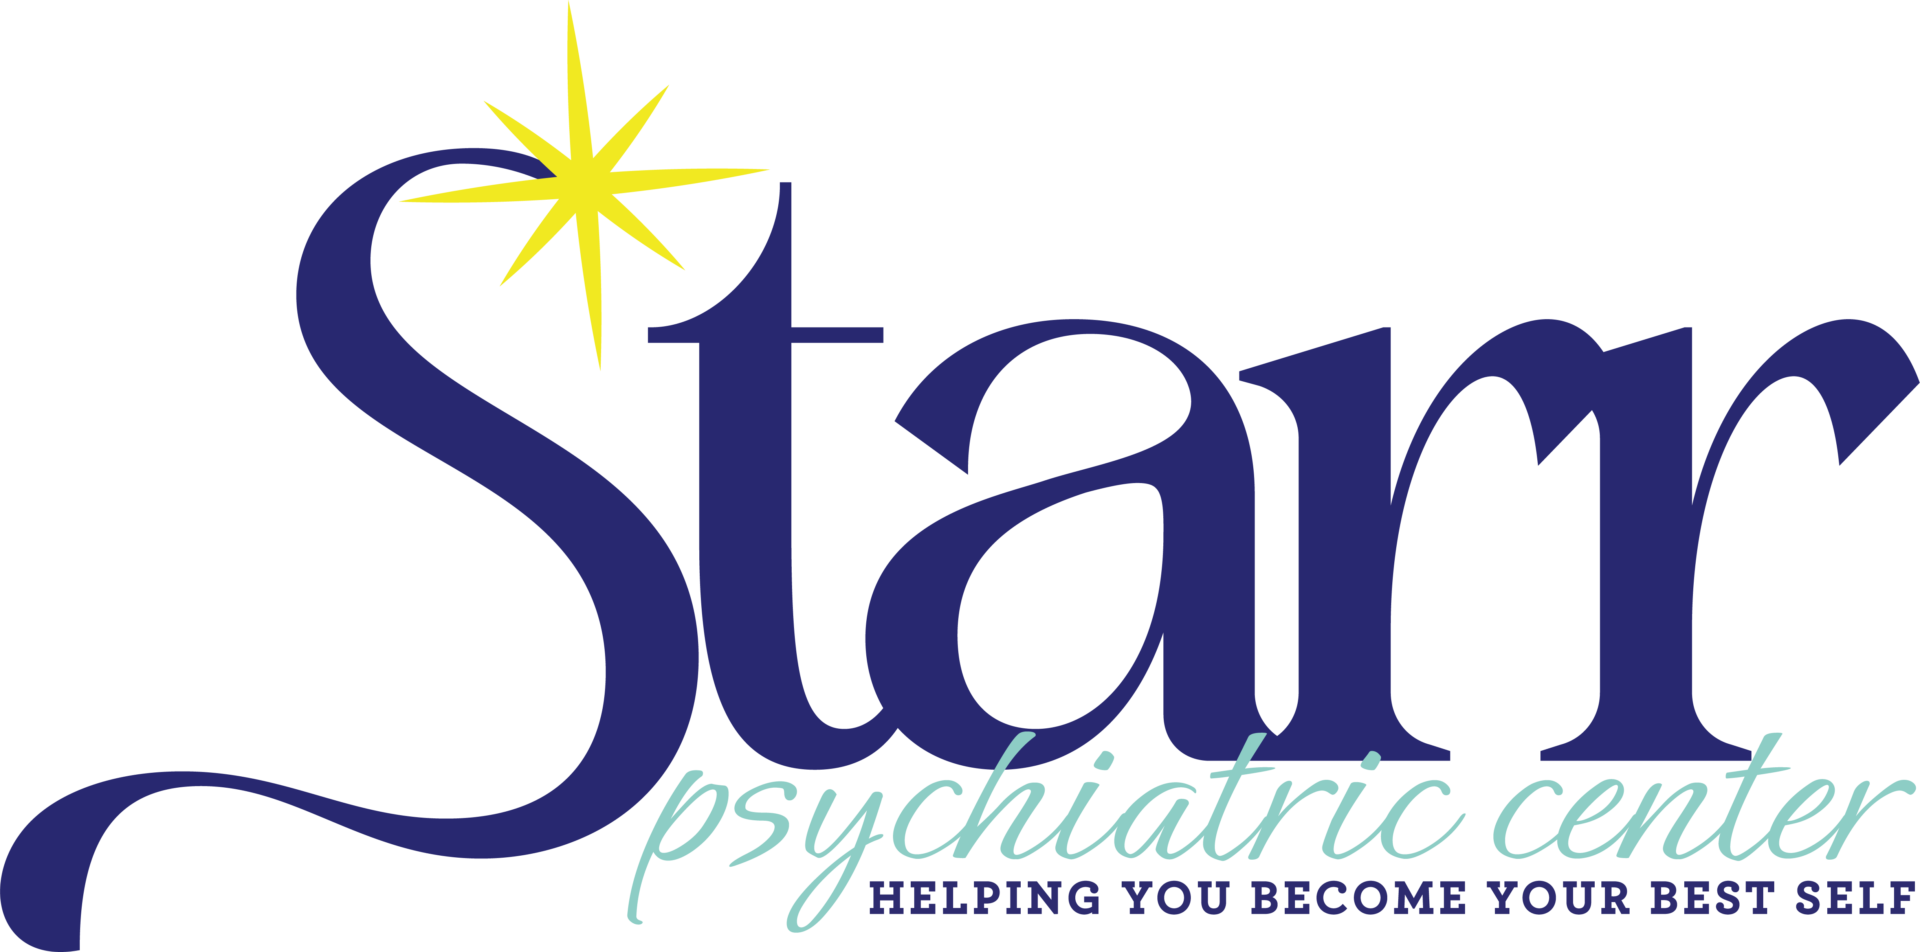 A star psychiatricis logo with the name of it